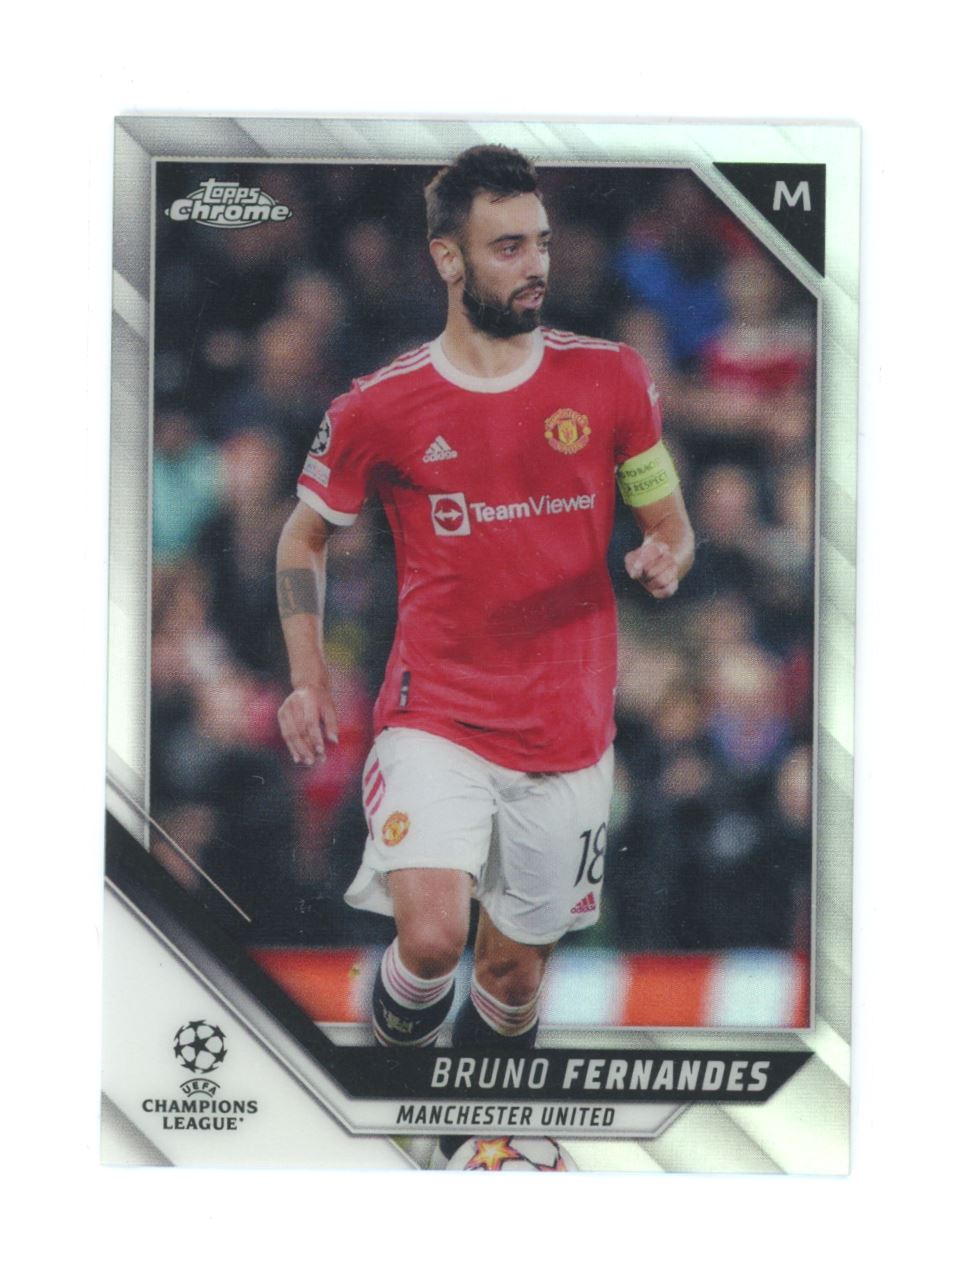 Bruno Fernandes Silver Refractor 2021 Topps Chrome Champions League Card # 73